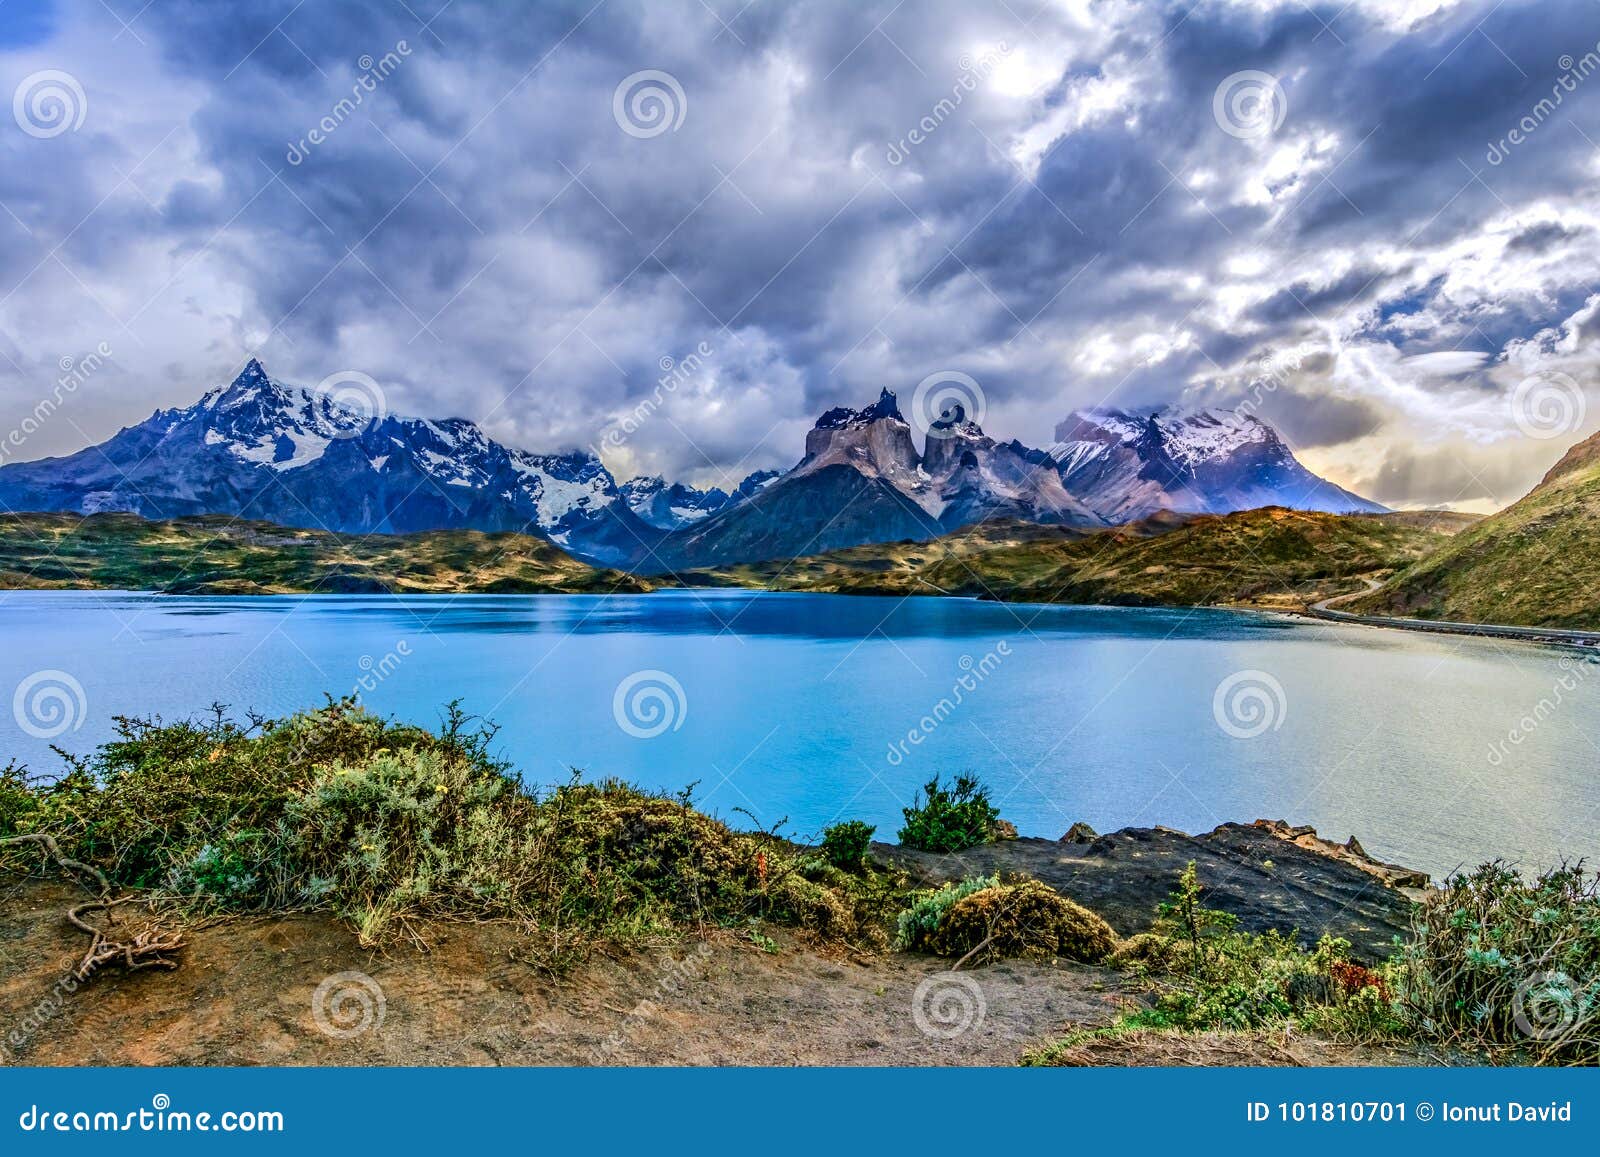 torres del paine over the pehoe lake, patagonia, chile - southern patagonian ice field, magellanes region